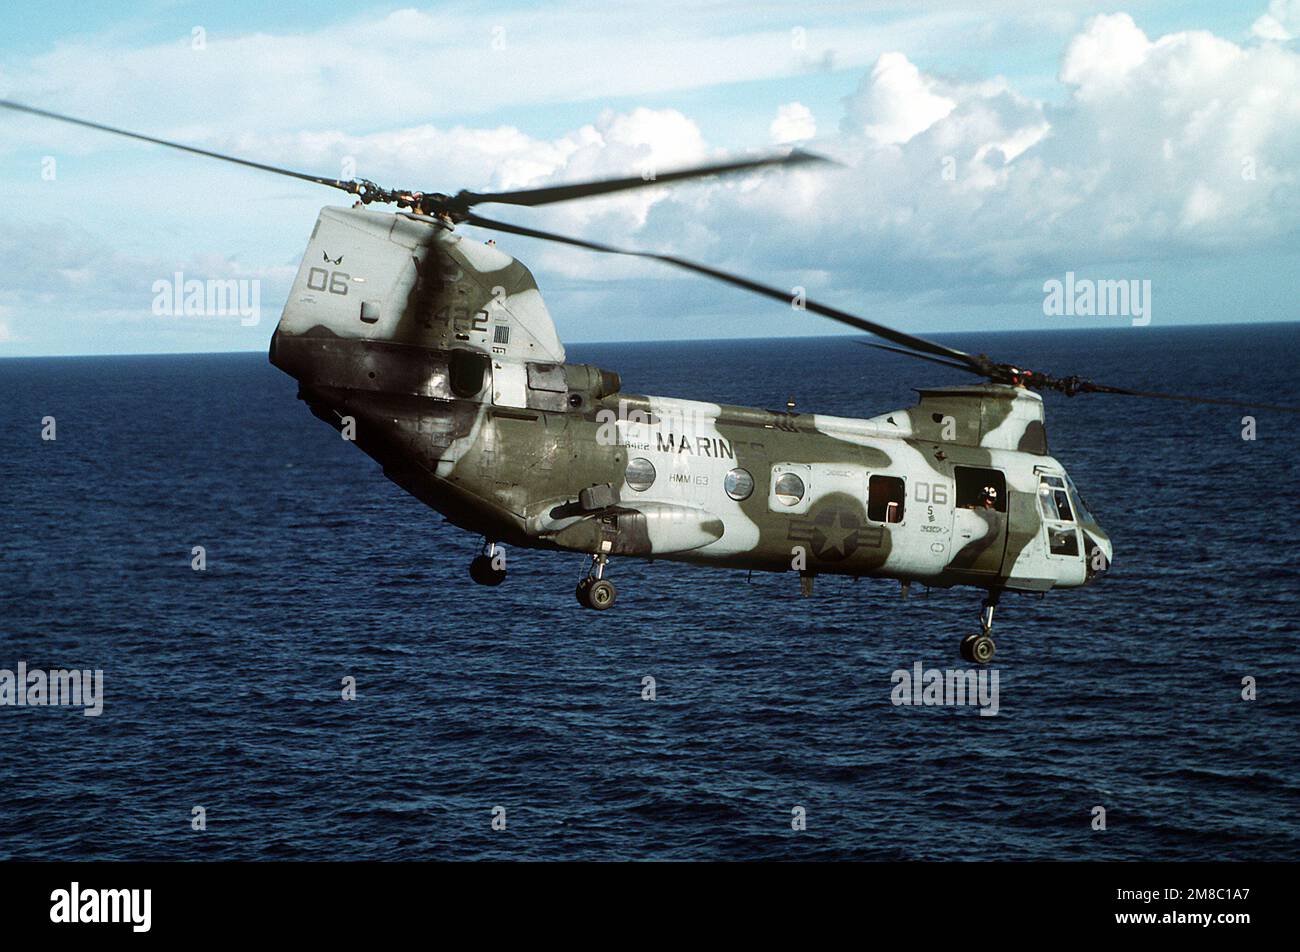 A CH-46E Sea Knight helicopter flies over the gulf after taking off from the amphibious assault ship USS TARAWA (LHA-1) during the combined Thai/U.S. joint exercise THALAY THAI '89. The helicopter is from Marine Medium Helicopter Squadron 163 (HMM-163), the reinforced aviation combat element of the 11th Marine Expeditionary Unit (11th MEU). Subject Operation/Series: THALAY THAI '89 Country: Gulf Of Thailand Stock Photo